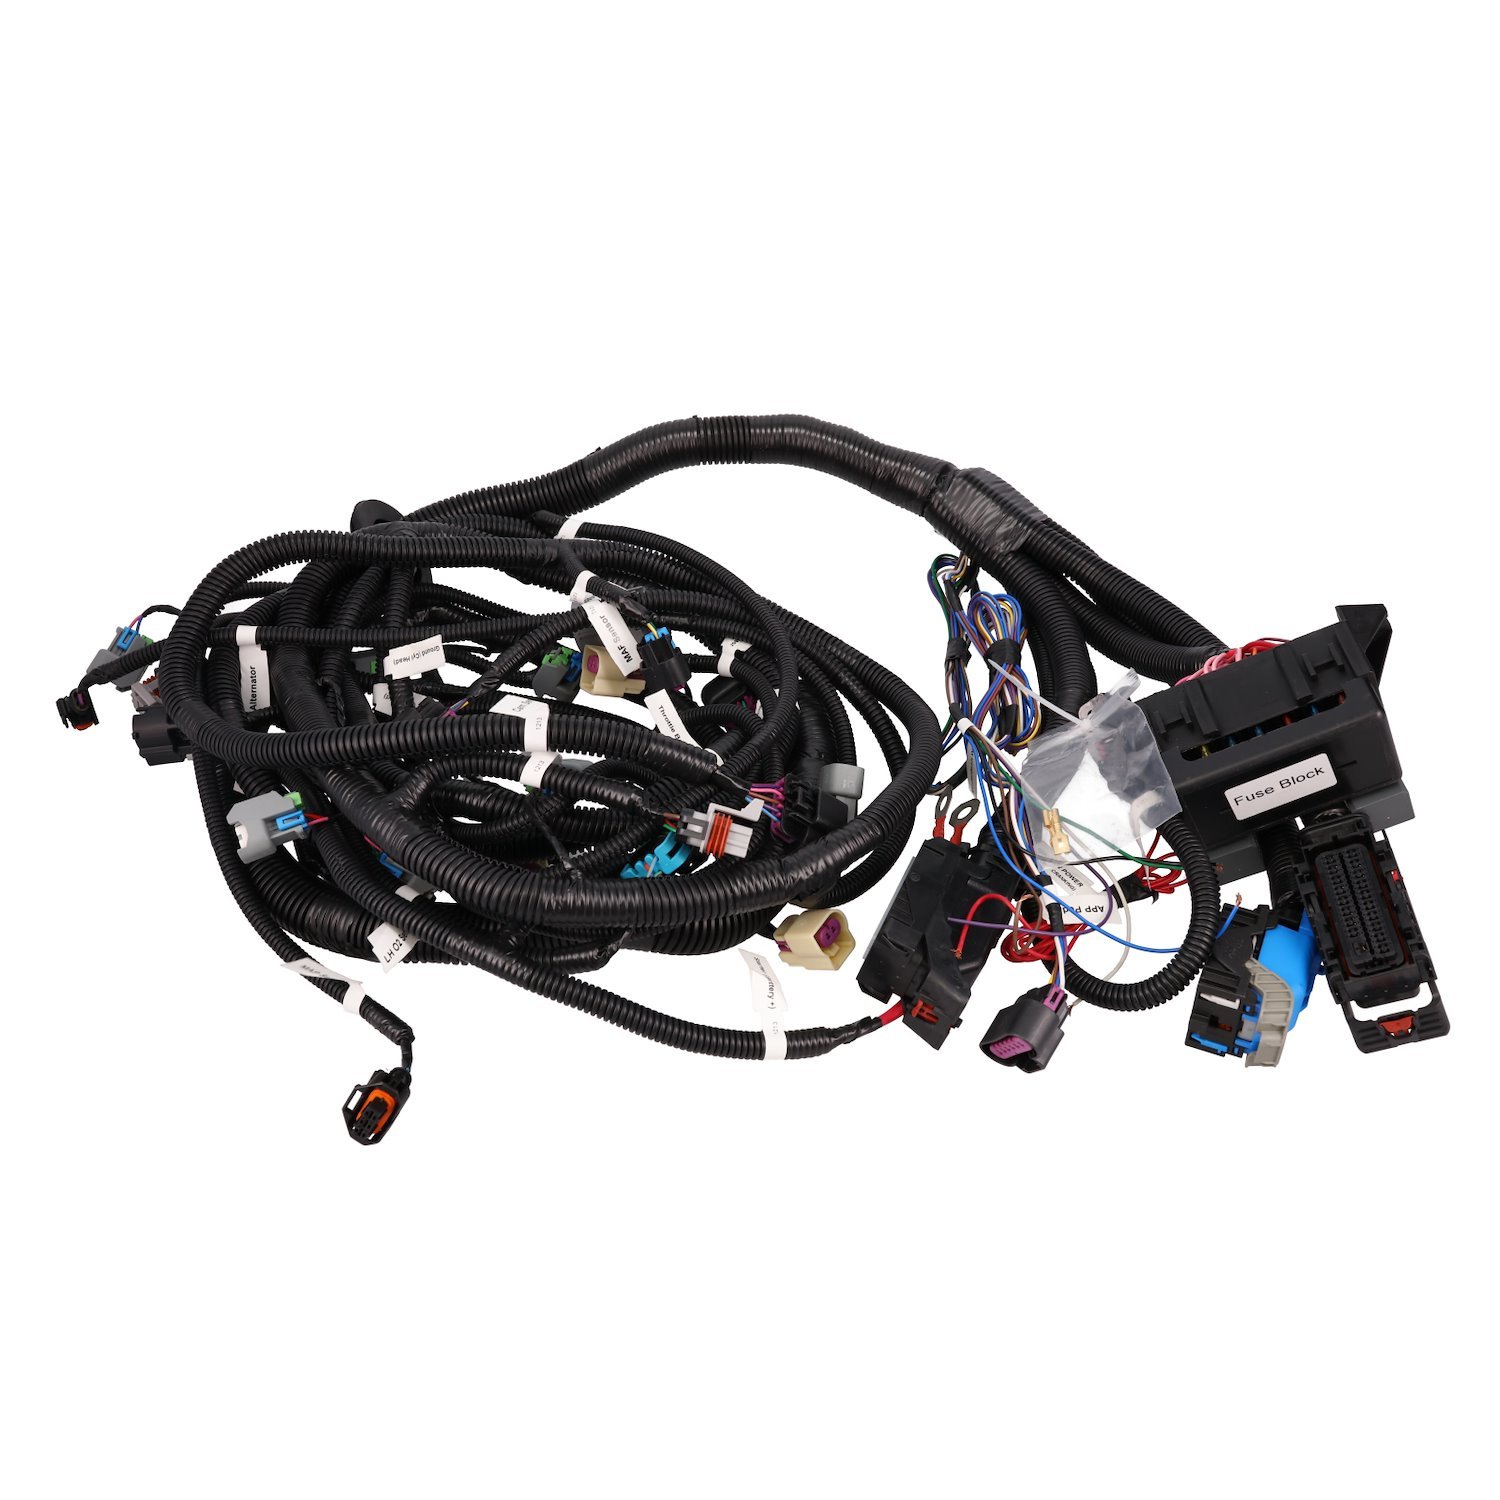 WH1213-1 Standalone Wiring Harness, LH6, LY5, LMG, LH8 Drive by Cable w/ 11-pin 4L80E